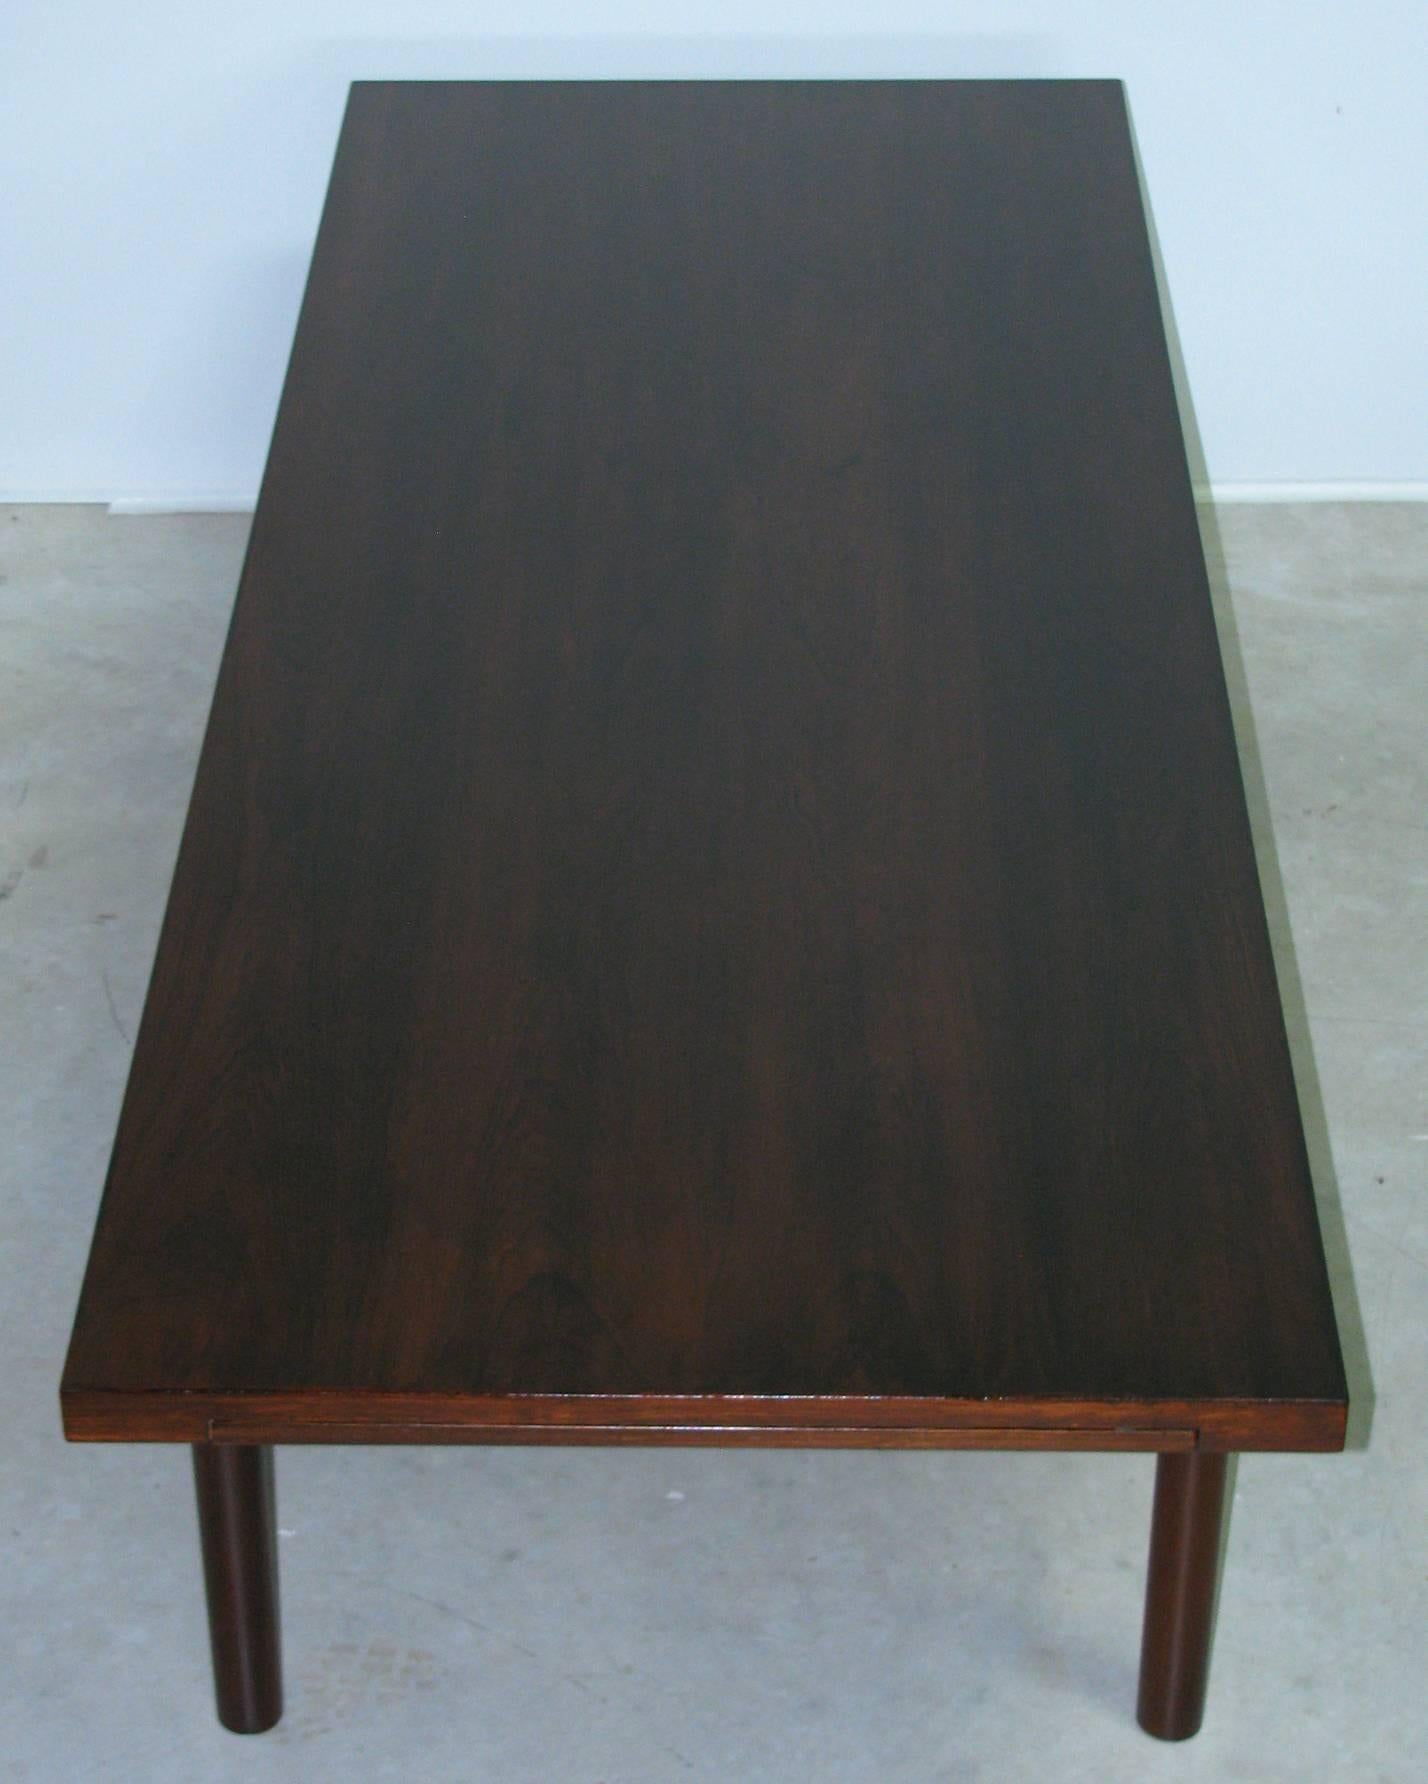 Mid-20th Century Danish Modern Rosewood Coffee Table with Extending Top